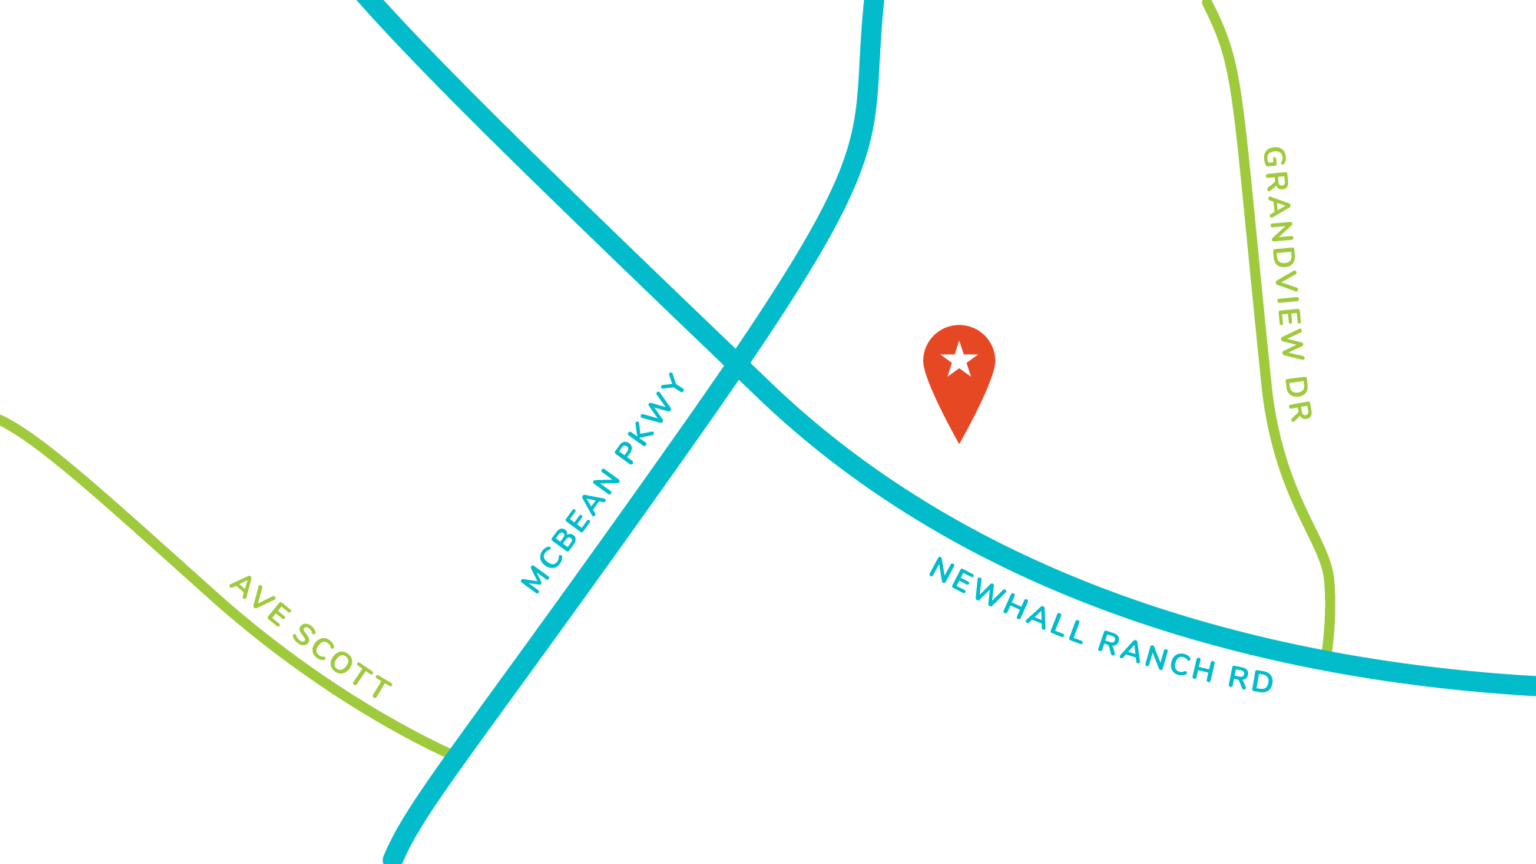 A map showing the location of a building.